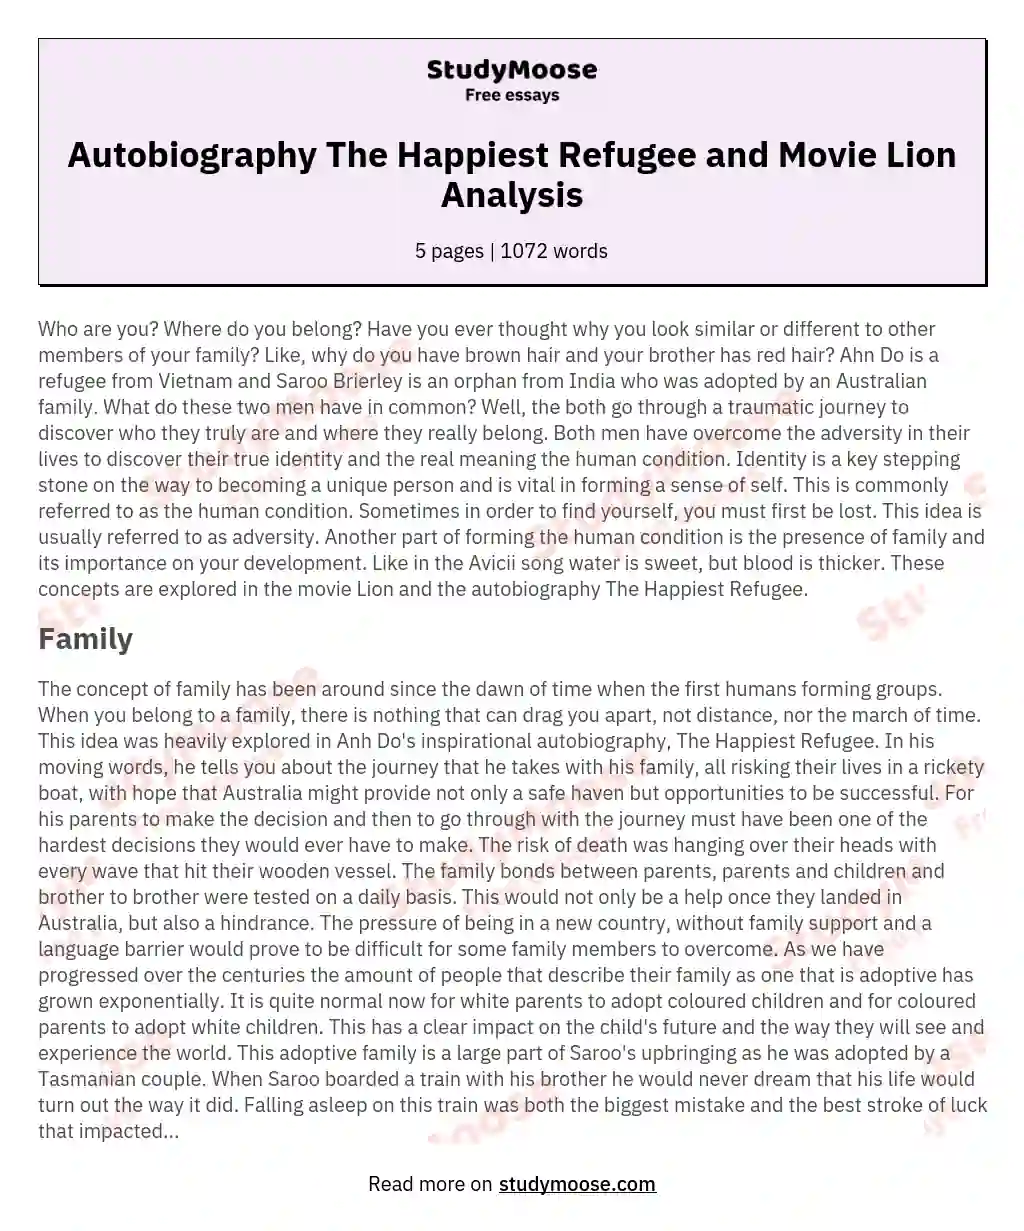 Autobiography The Happiest Refugee and Movie Lion Analysis